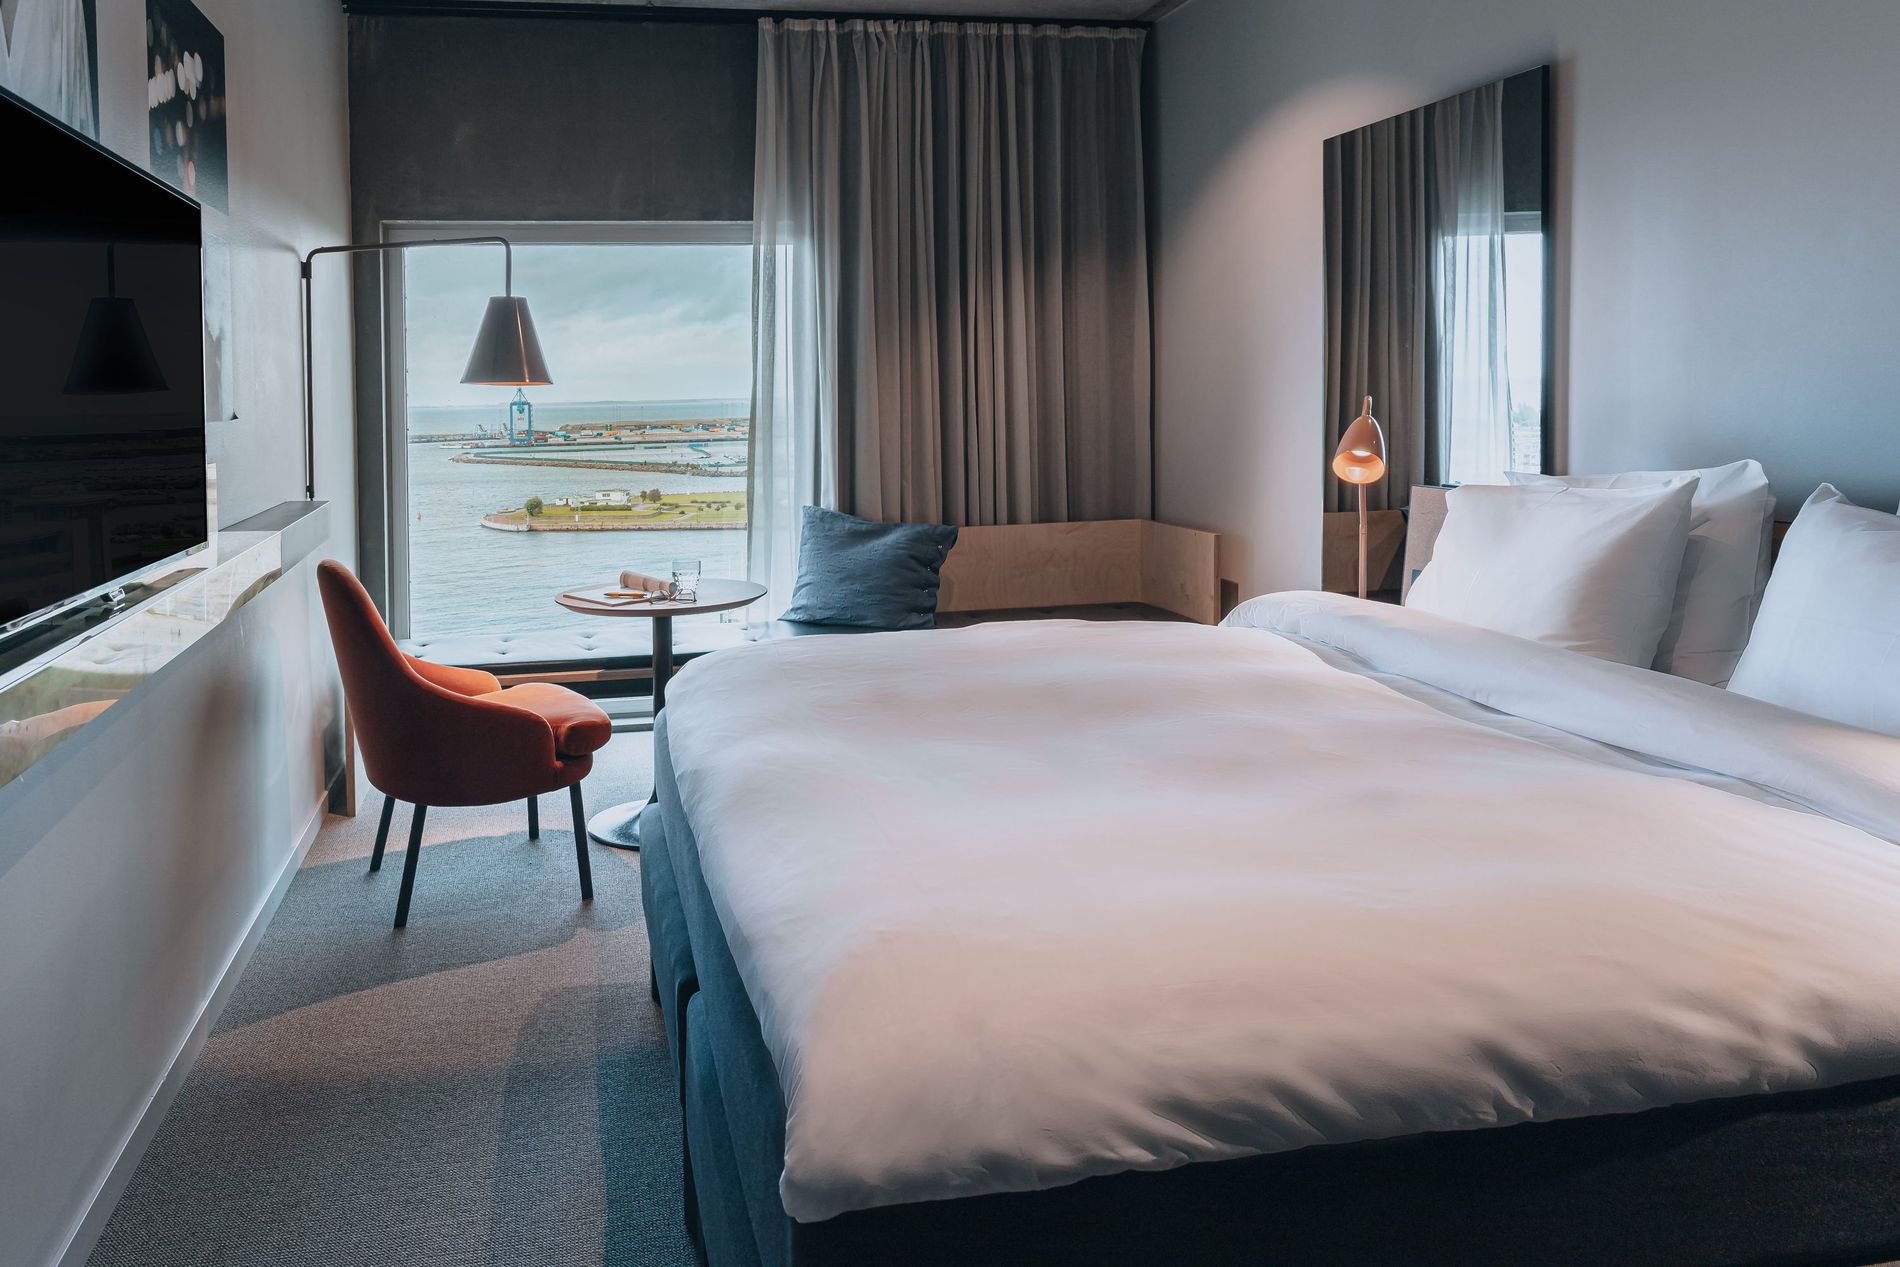 A room at Story Hotel in Malmo with views across the water